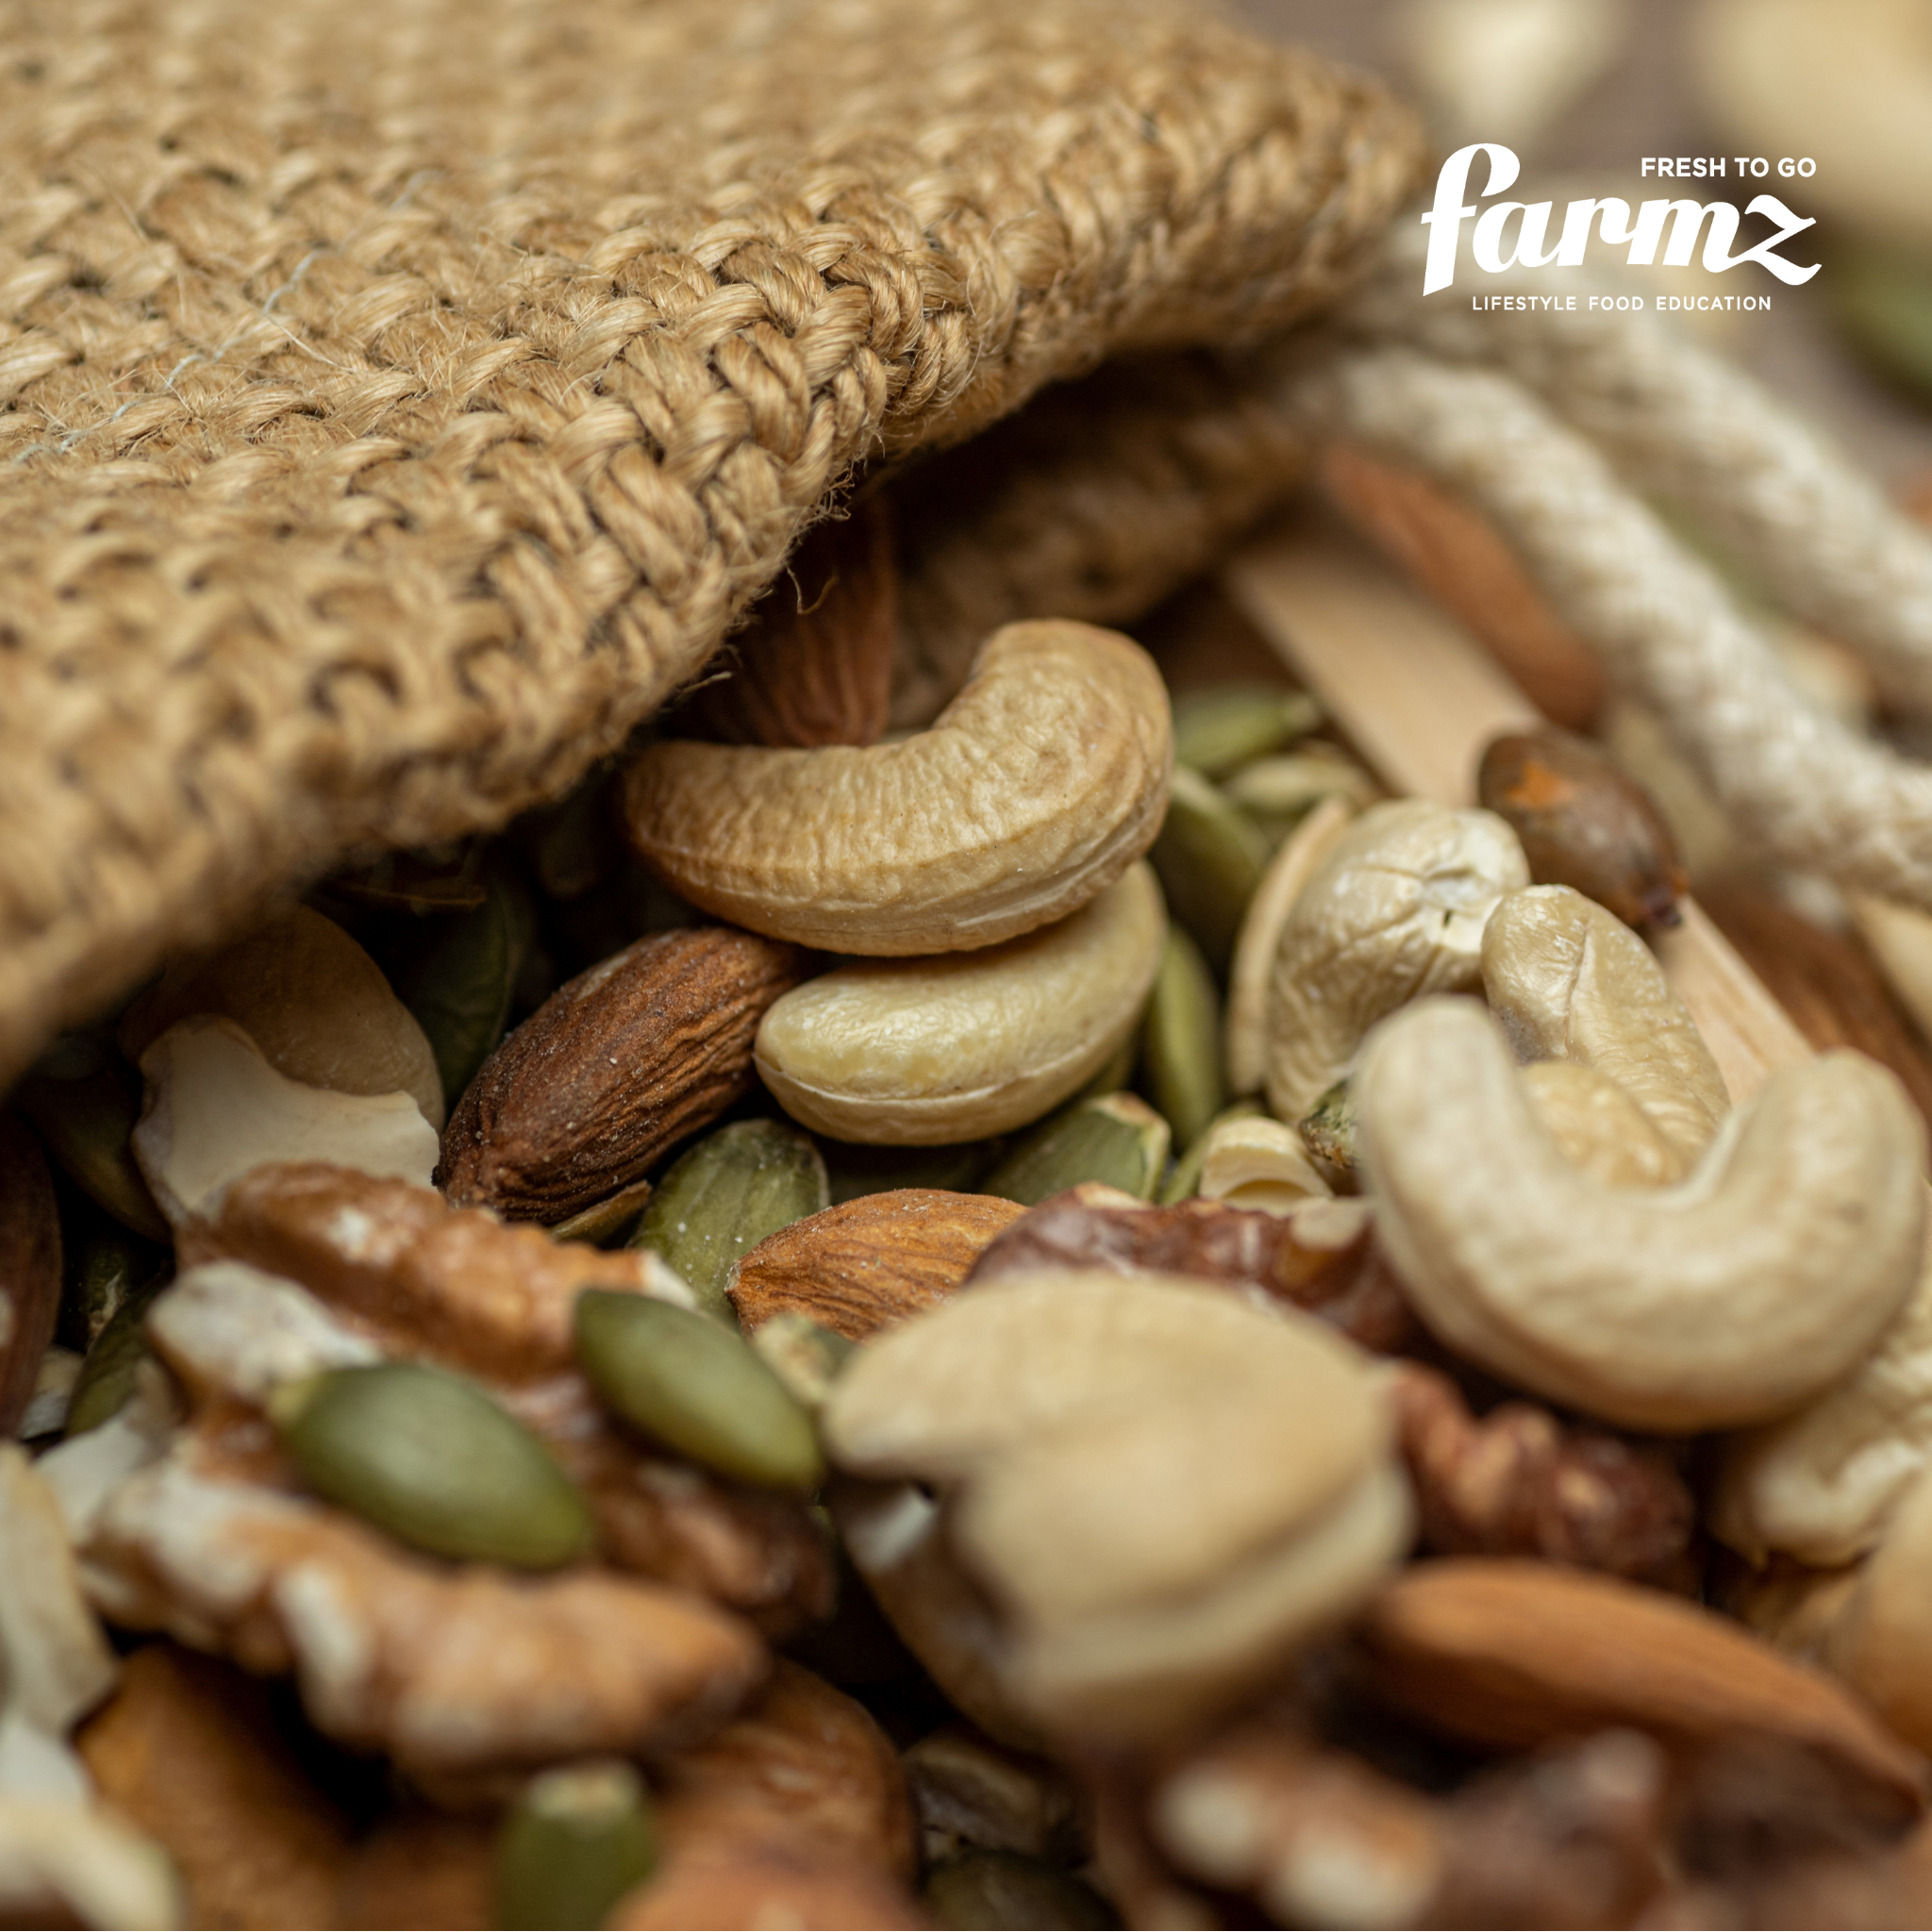 Baked Mixed Nuts, Baked Almonds, Baked Cashew nuts, Baked Walnuts, Baked Pumpkin Seeds